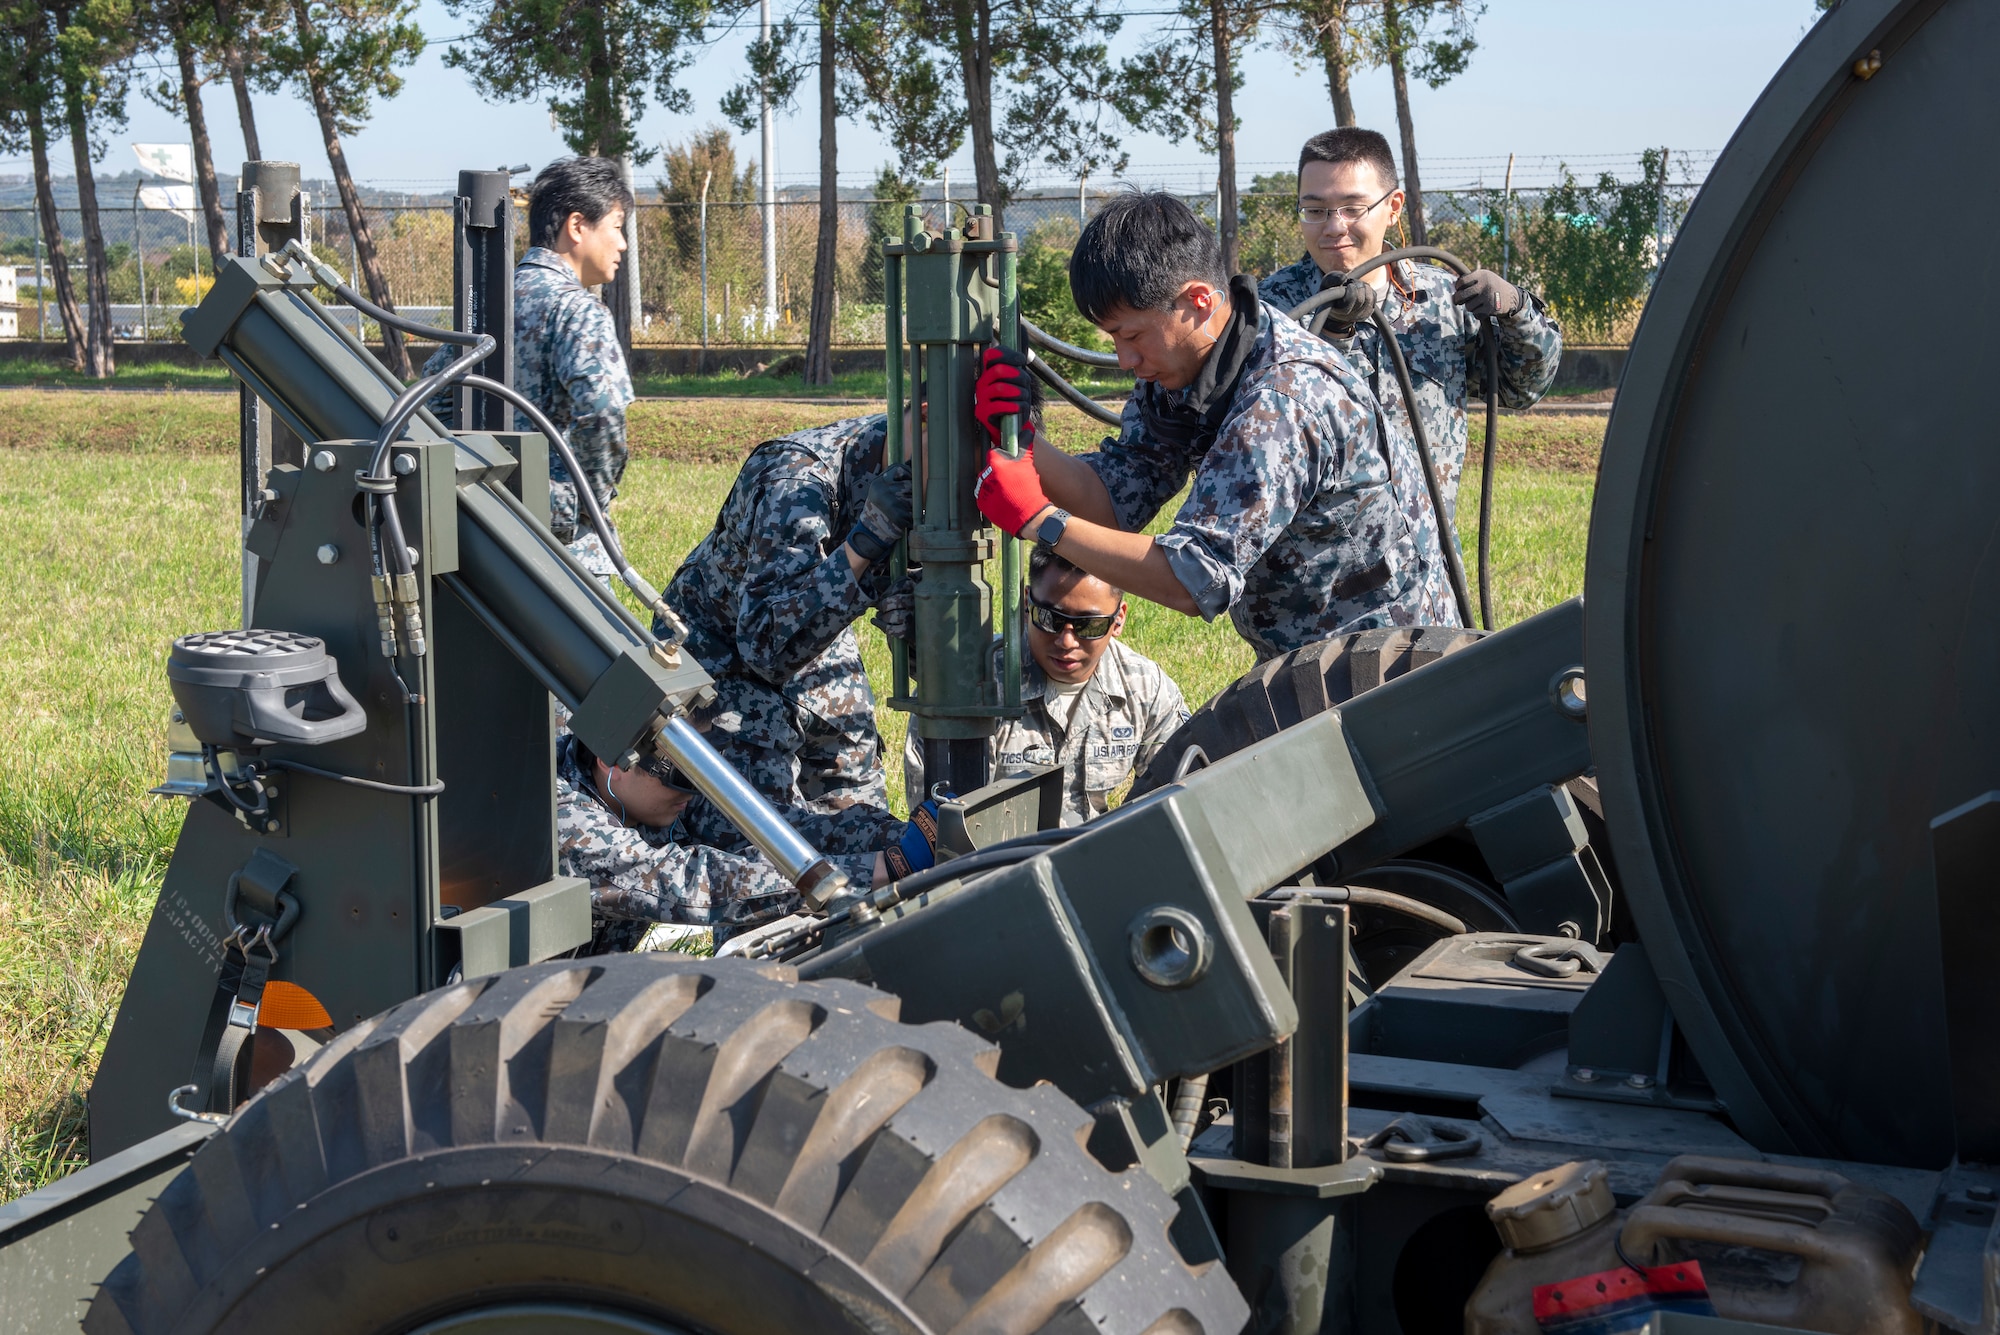 Airmen from the 374th Civil Engineer Squadron work with Koku Jietai (Japan Air Self-Defense Force) members to secure the Mobile Aircraft Arresting System (MAAS) in place at a bilateral training event at Yokota Air Base, Japan, Oct. 25, 2018.